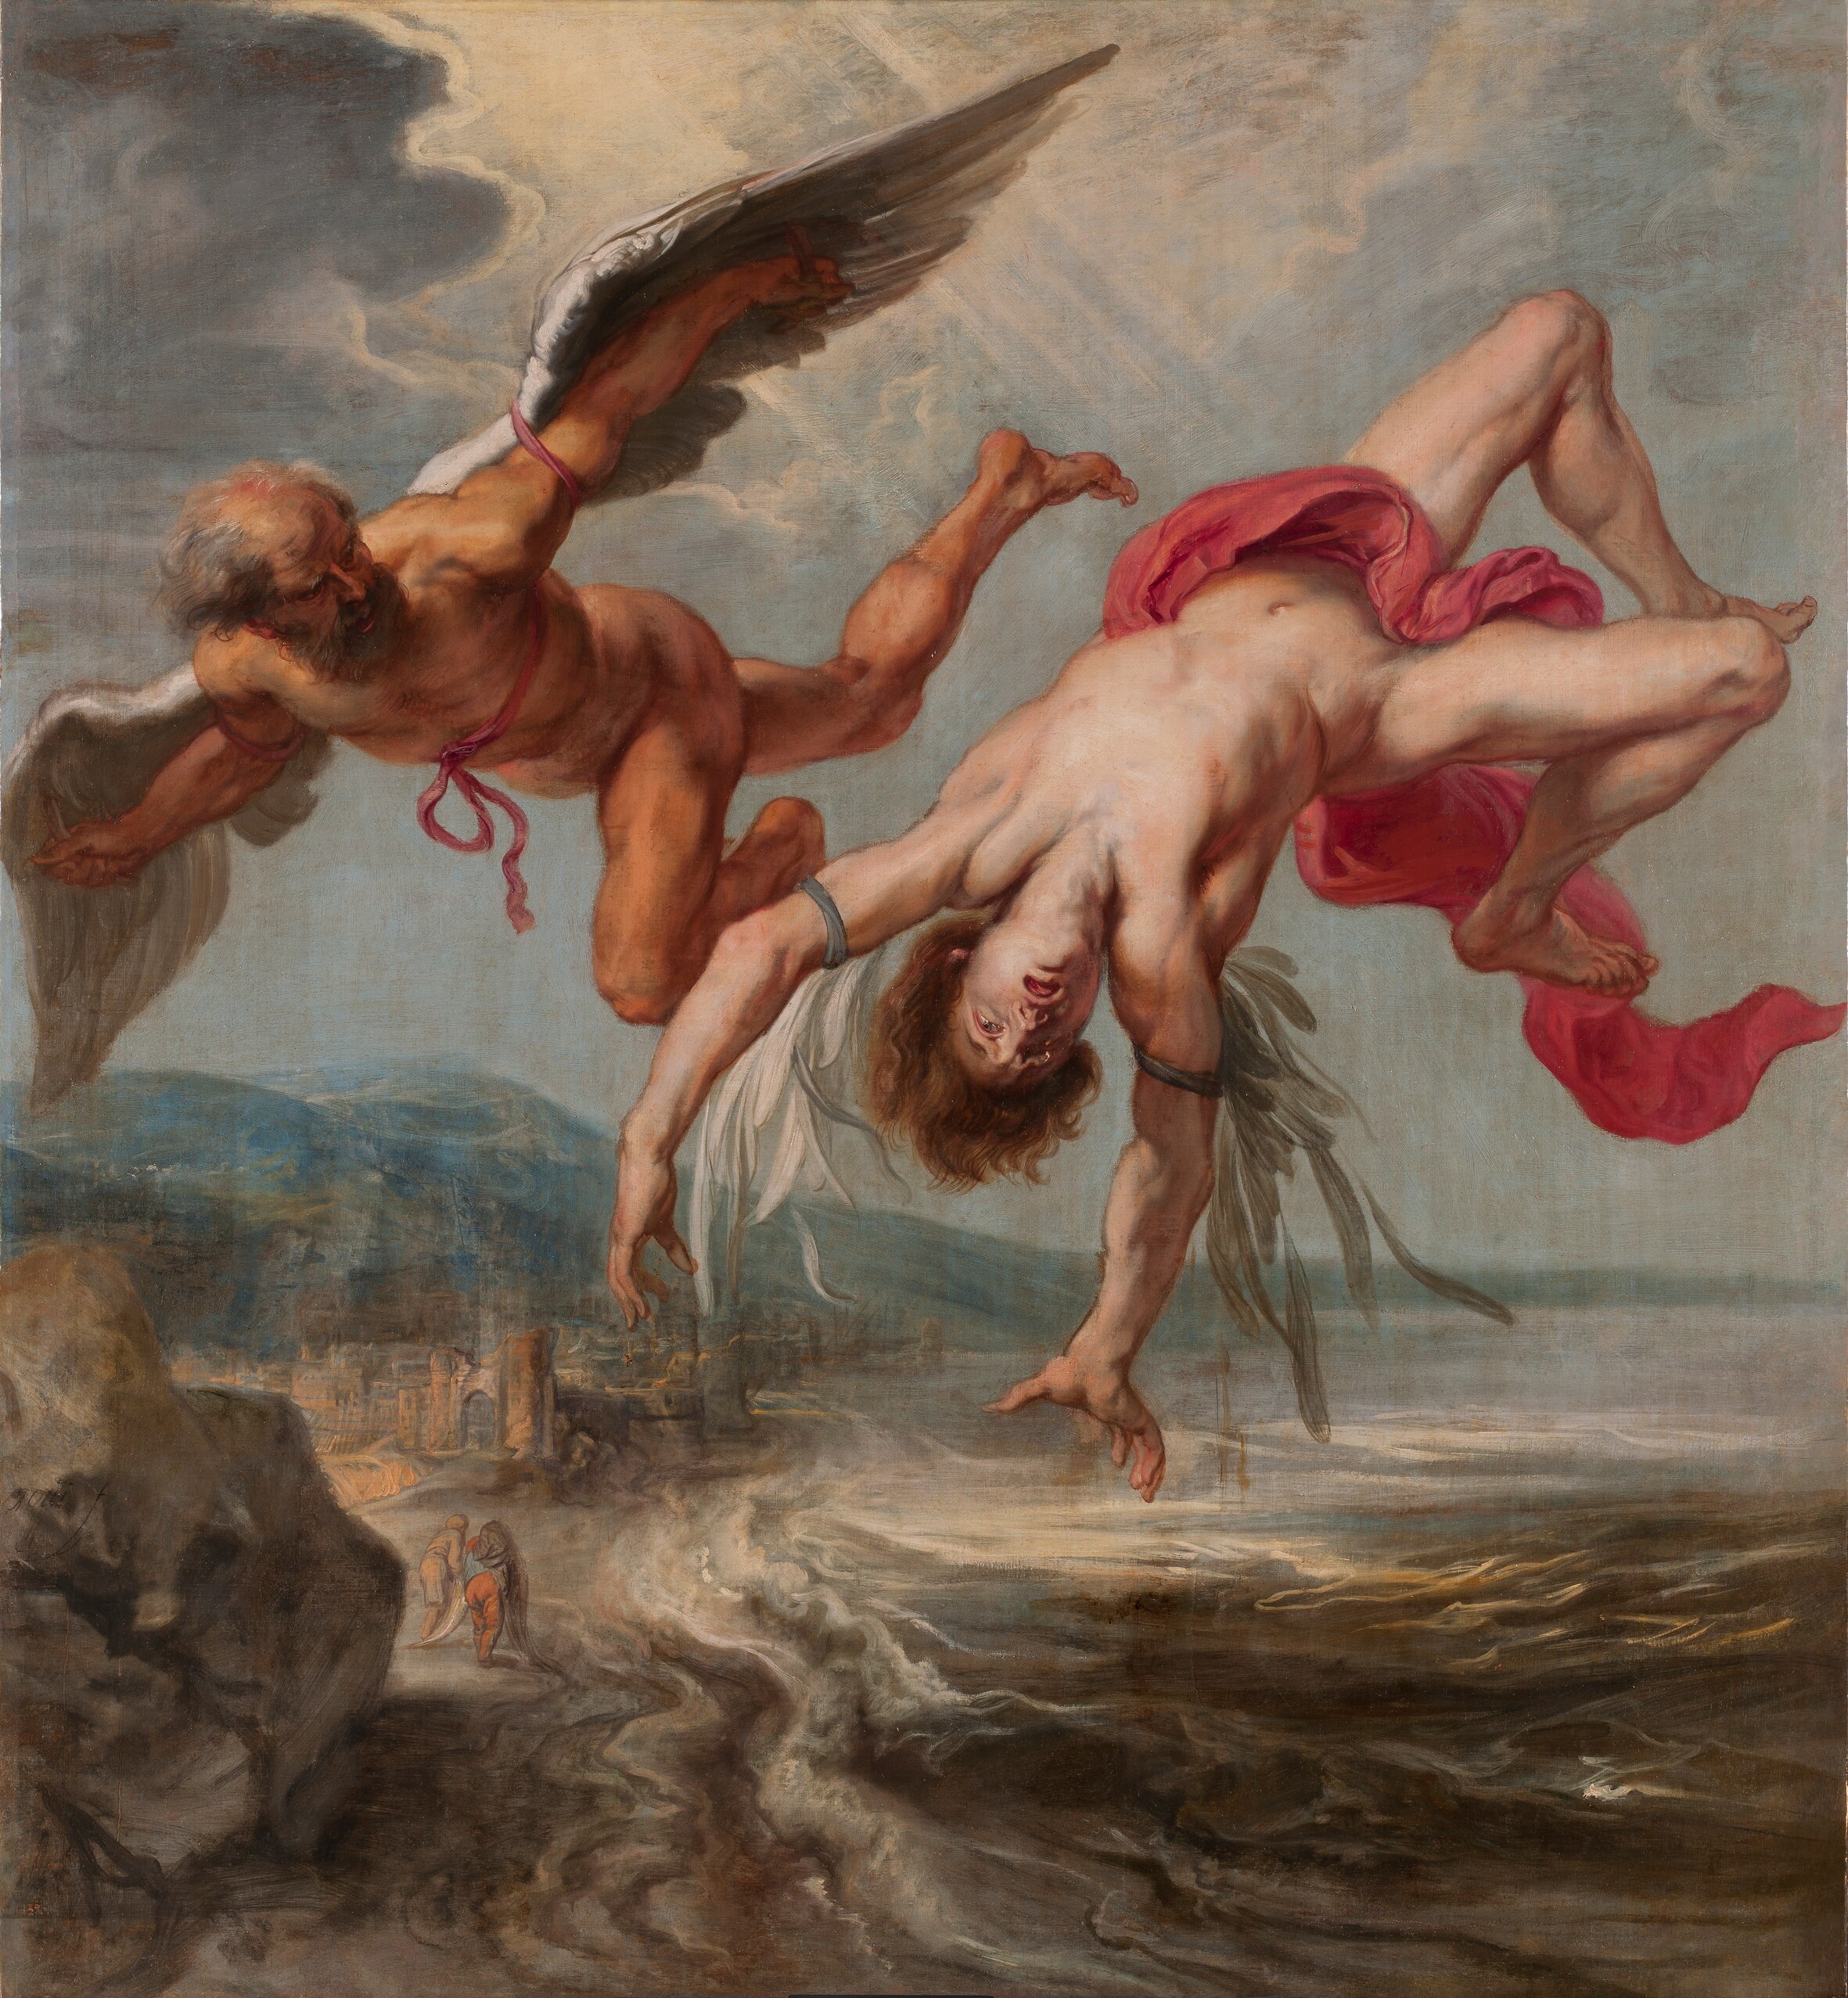 Jacob Peter Gowy's, The Flight of Icarus (1635–1637). 